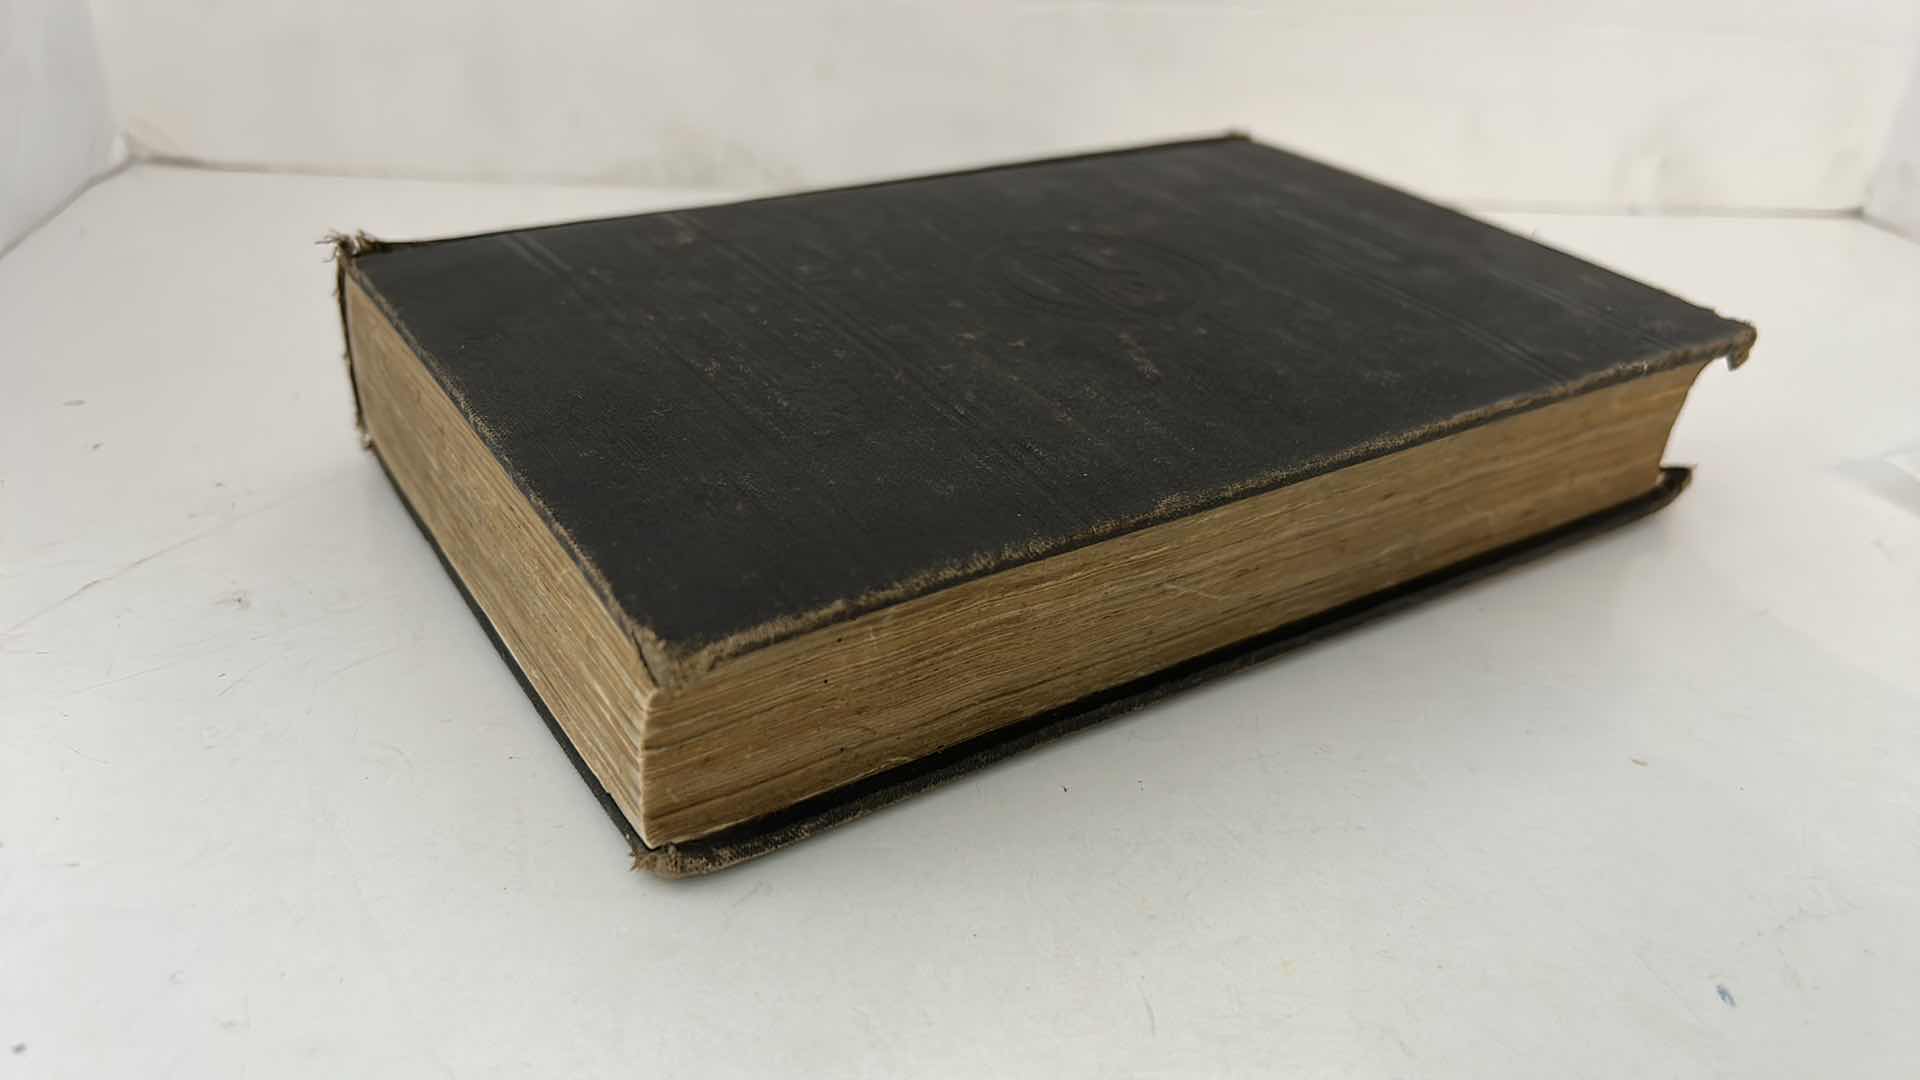 Photo 3 of VINTAGE 1913 HARDCOVER BOOK “POSTAL LAWS AND REGULATIONS”